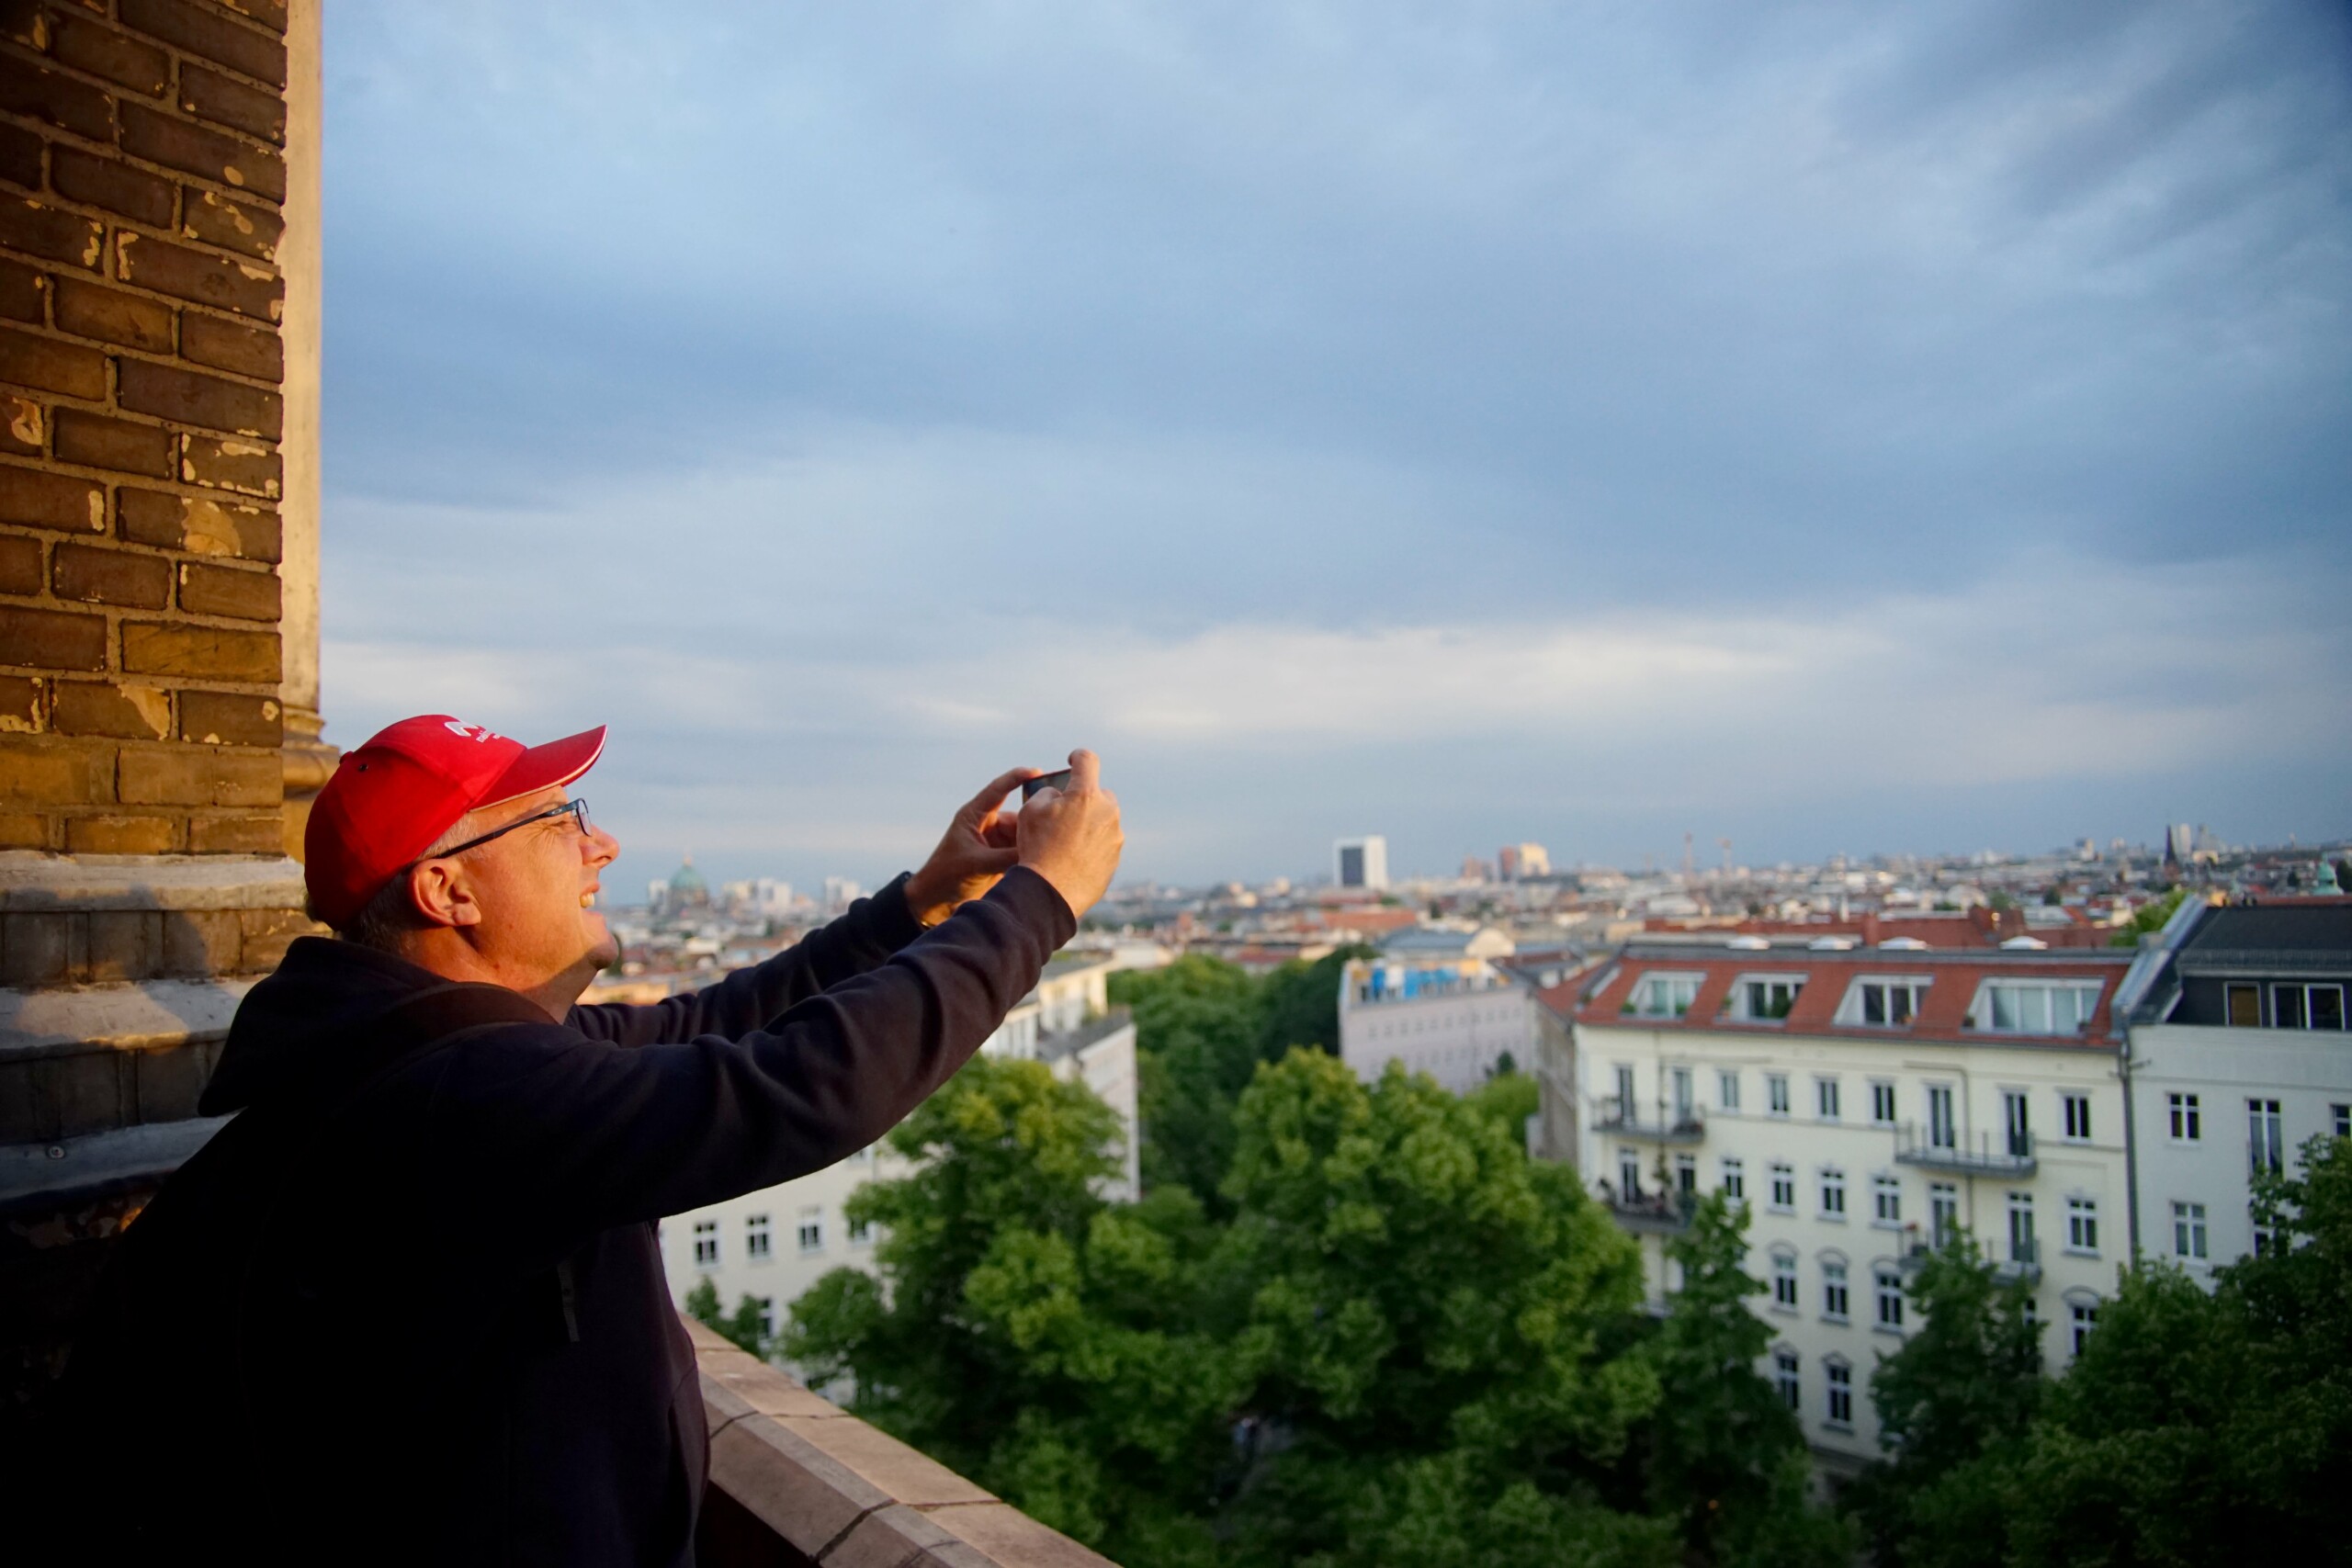 A man takes a photo from the top of Zionskirche church in Berlin, Germany